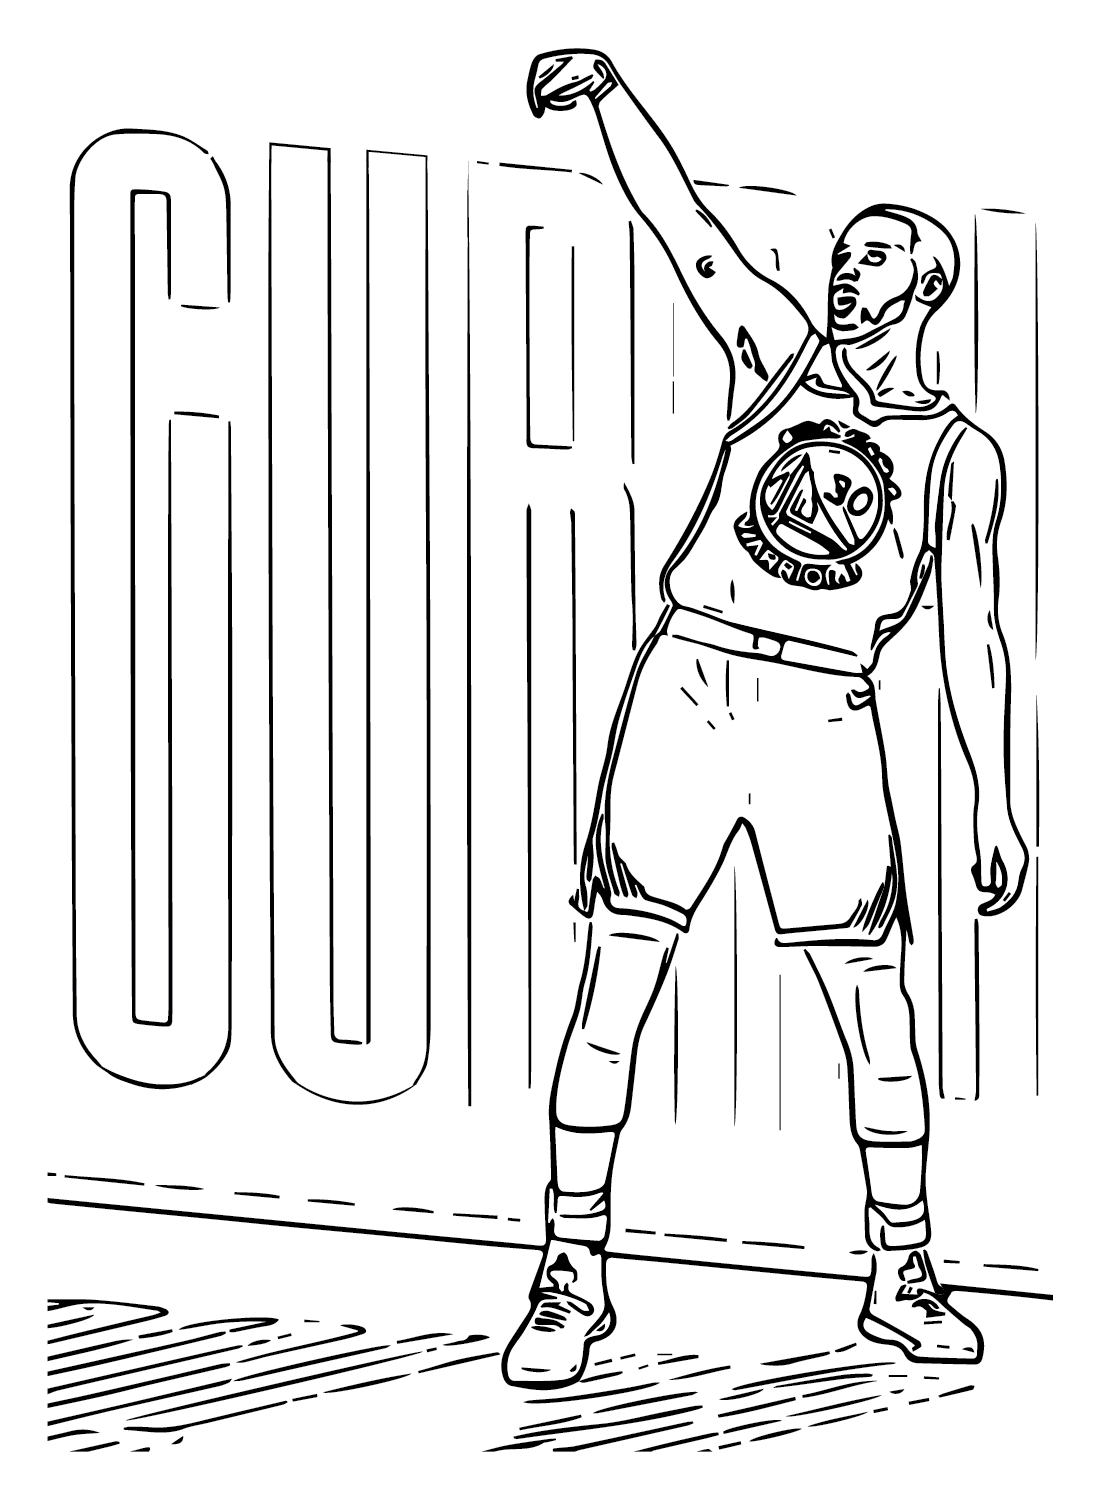 Stephen Curry Coloring Pages Printable for Free Download